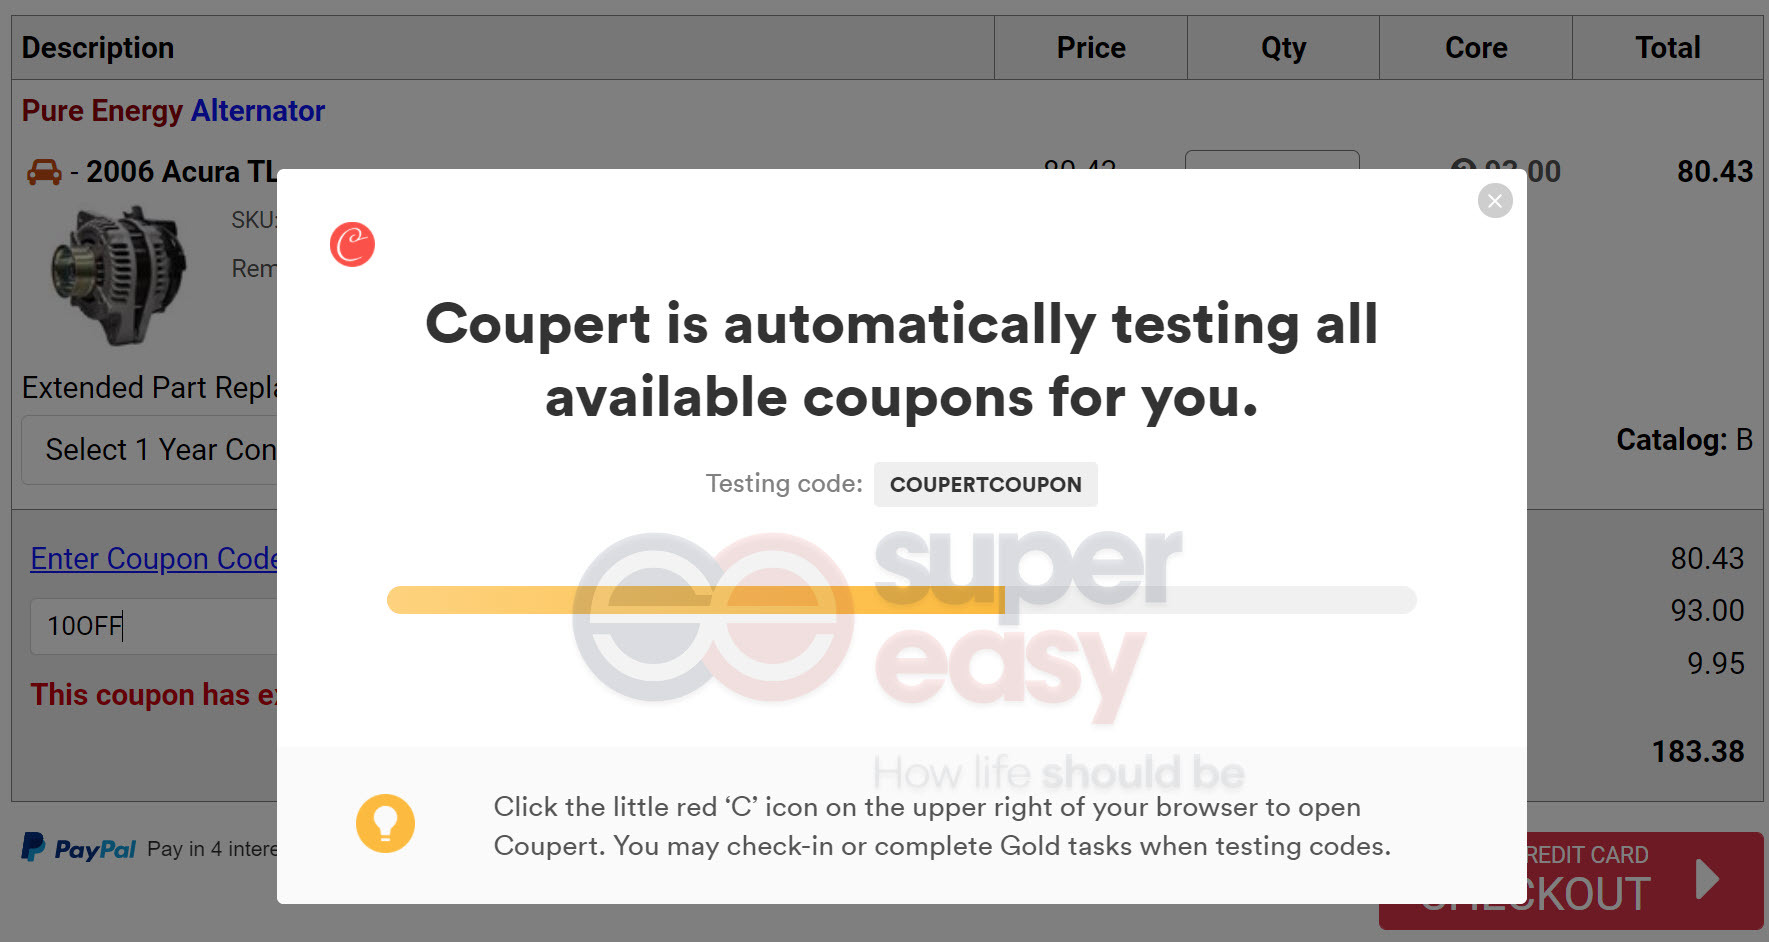 Parts Geek coupons coupert searching